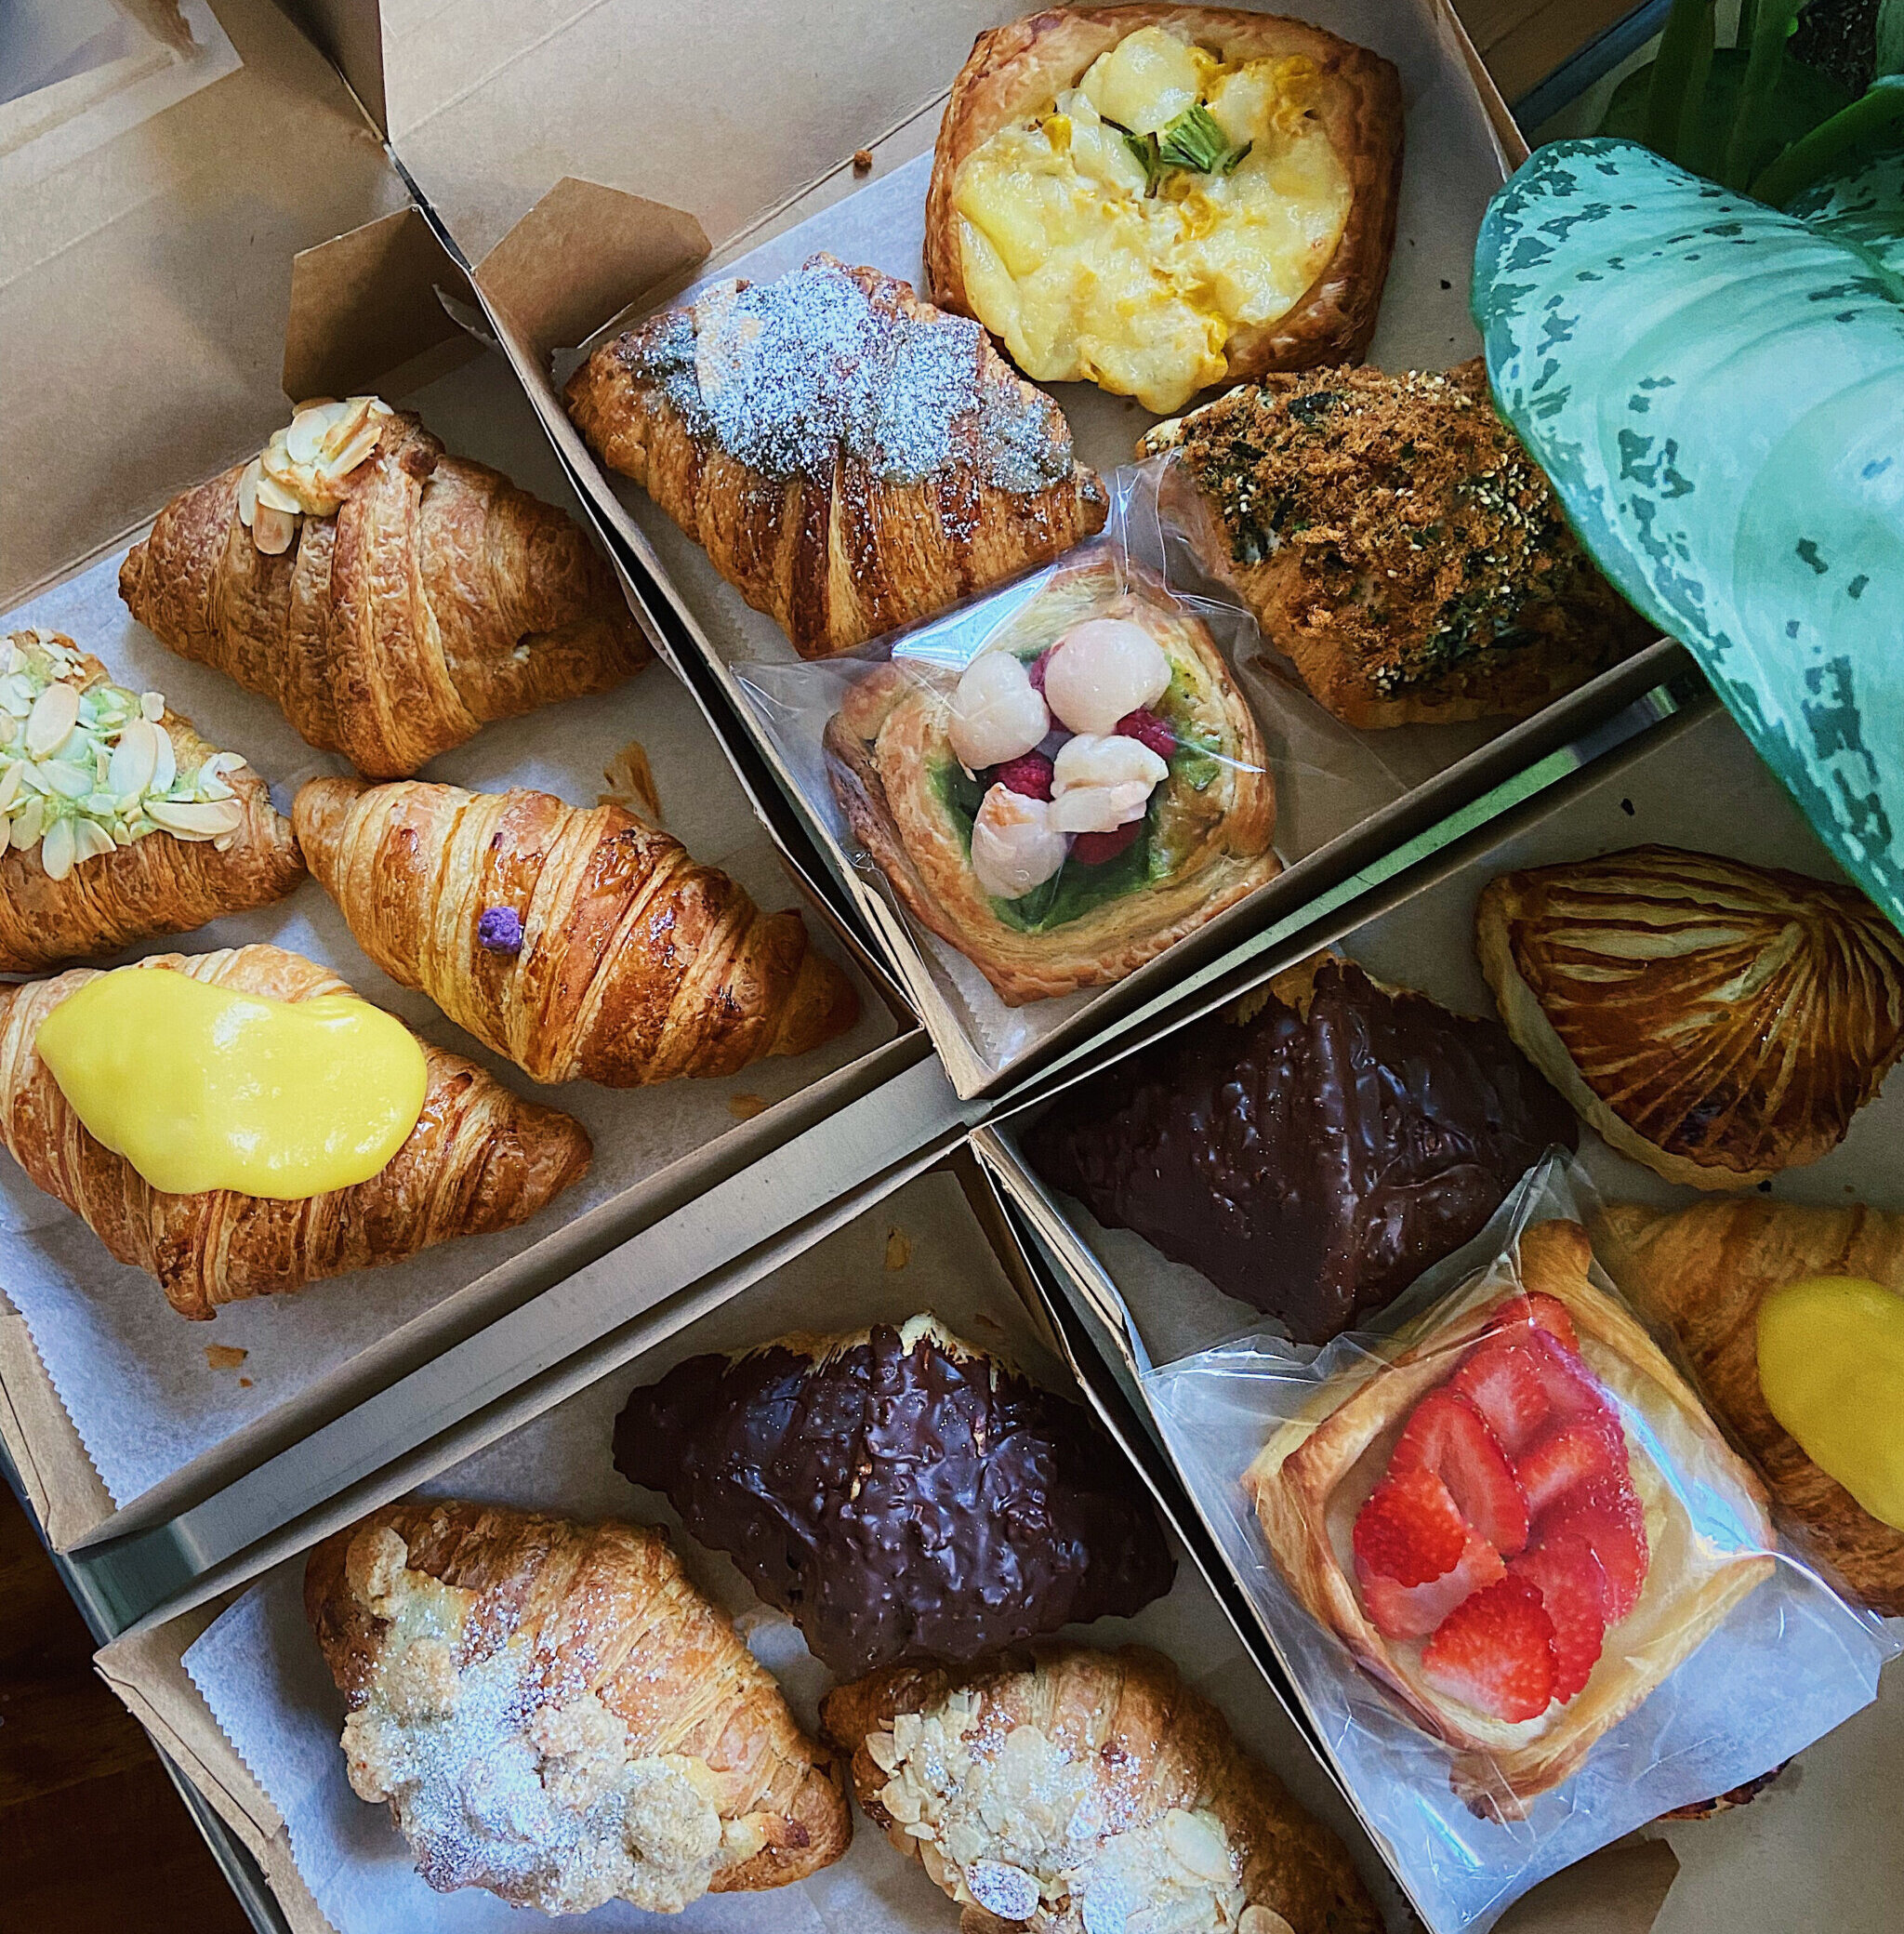 Boxes filled with croissants and other pastries.